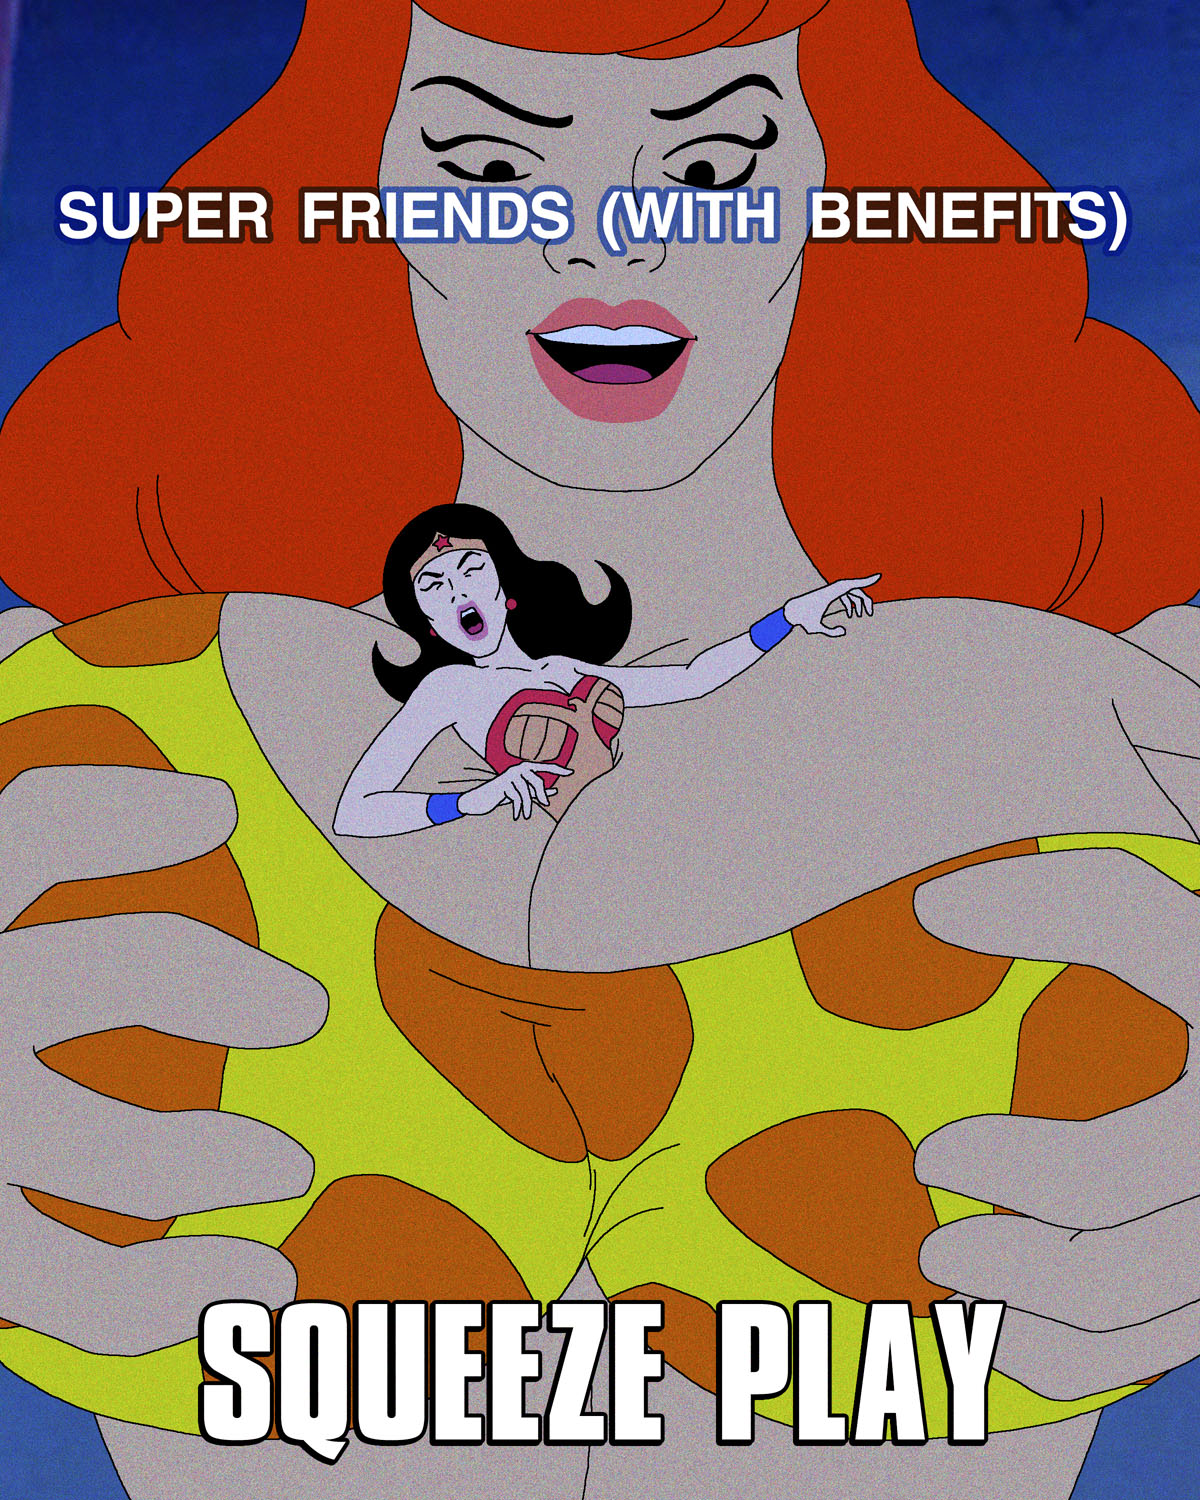 Super Friends with Benefits Squeeze Play 18+ Porn Comics photo